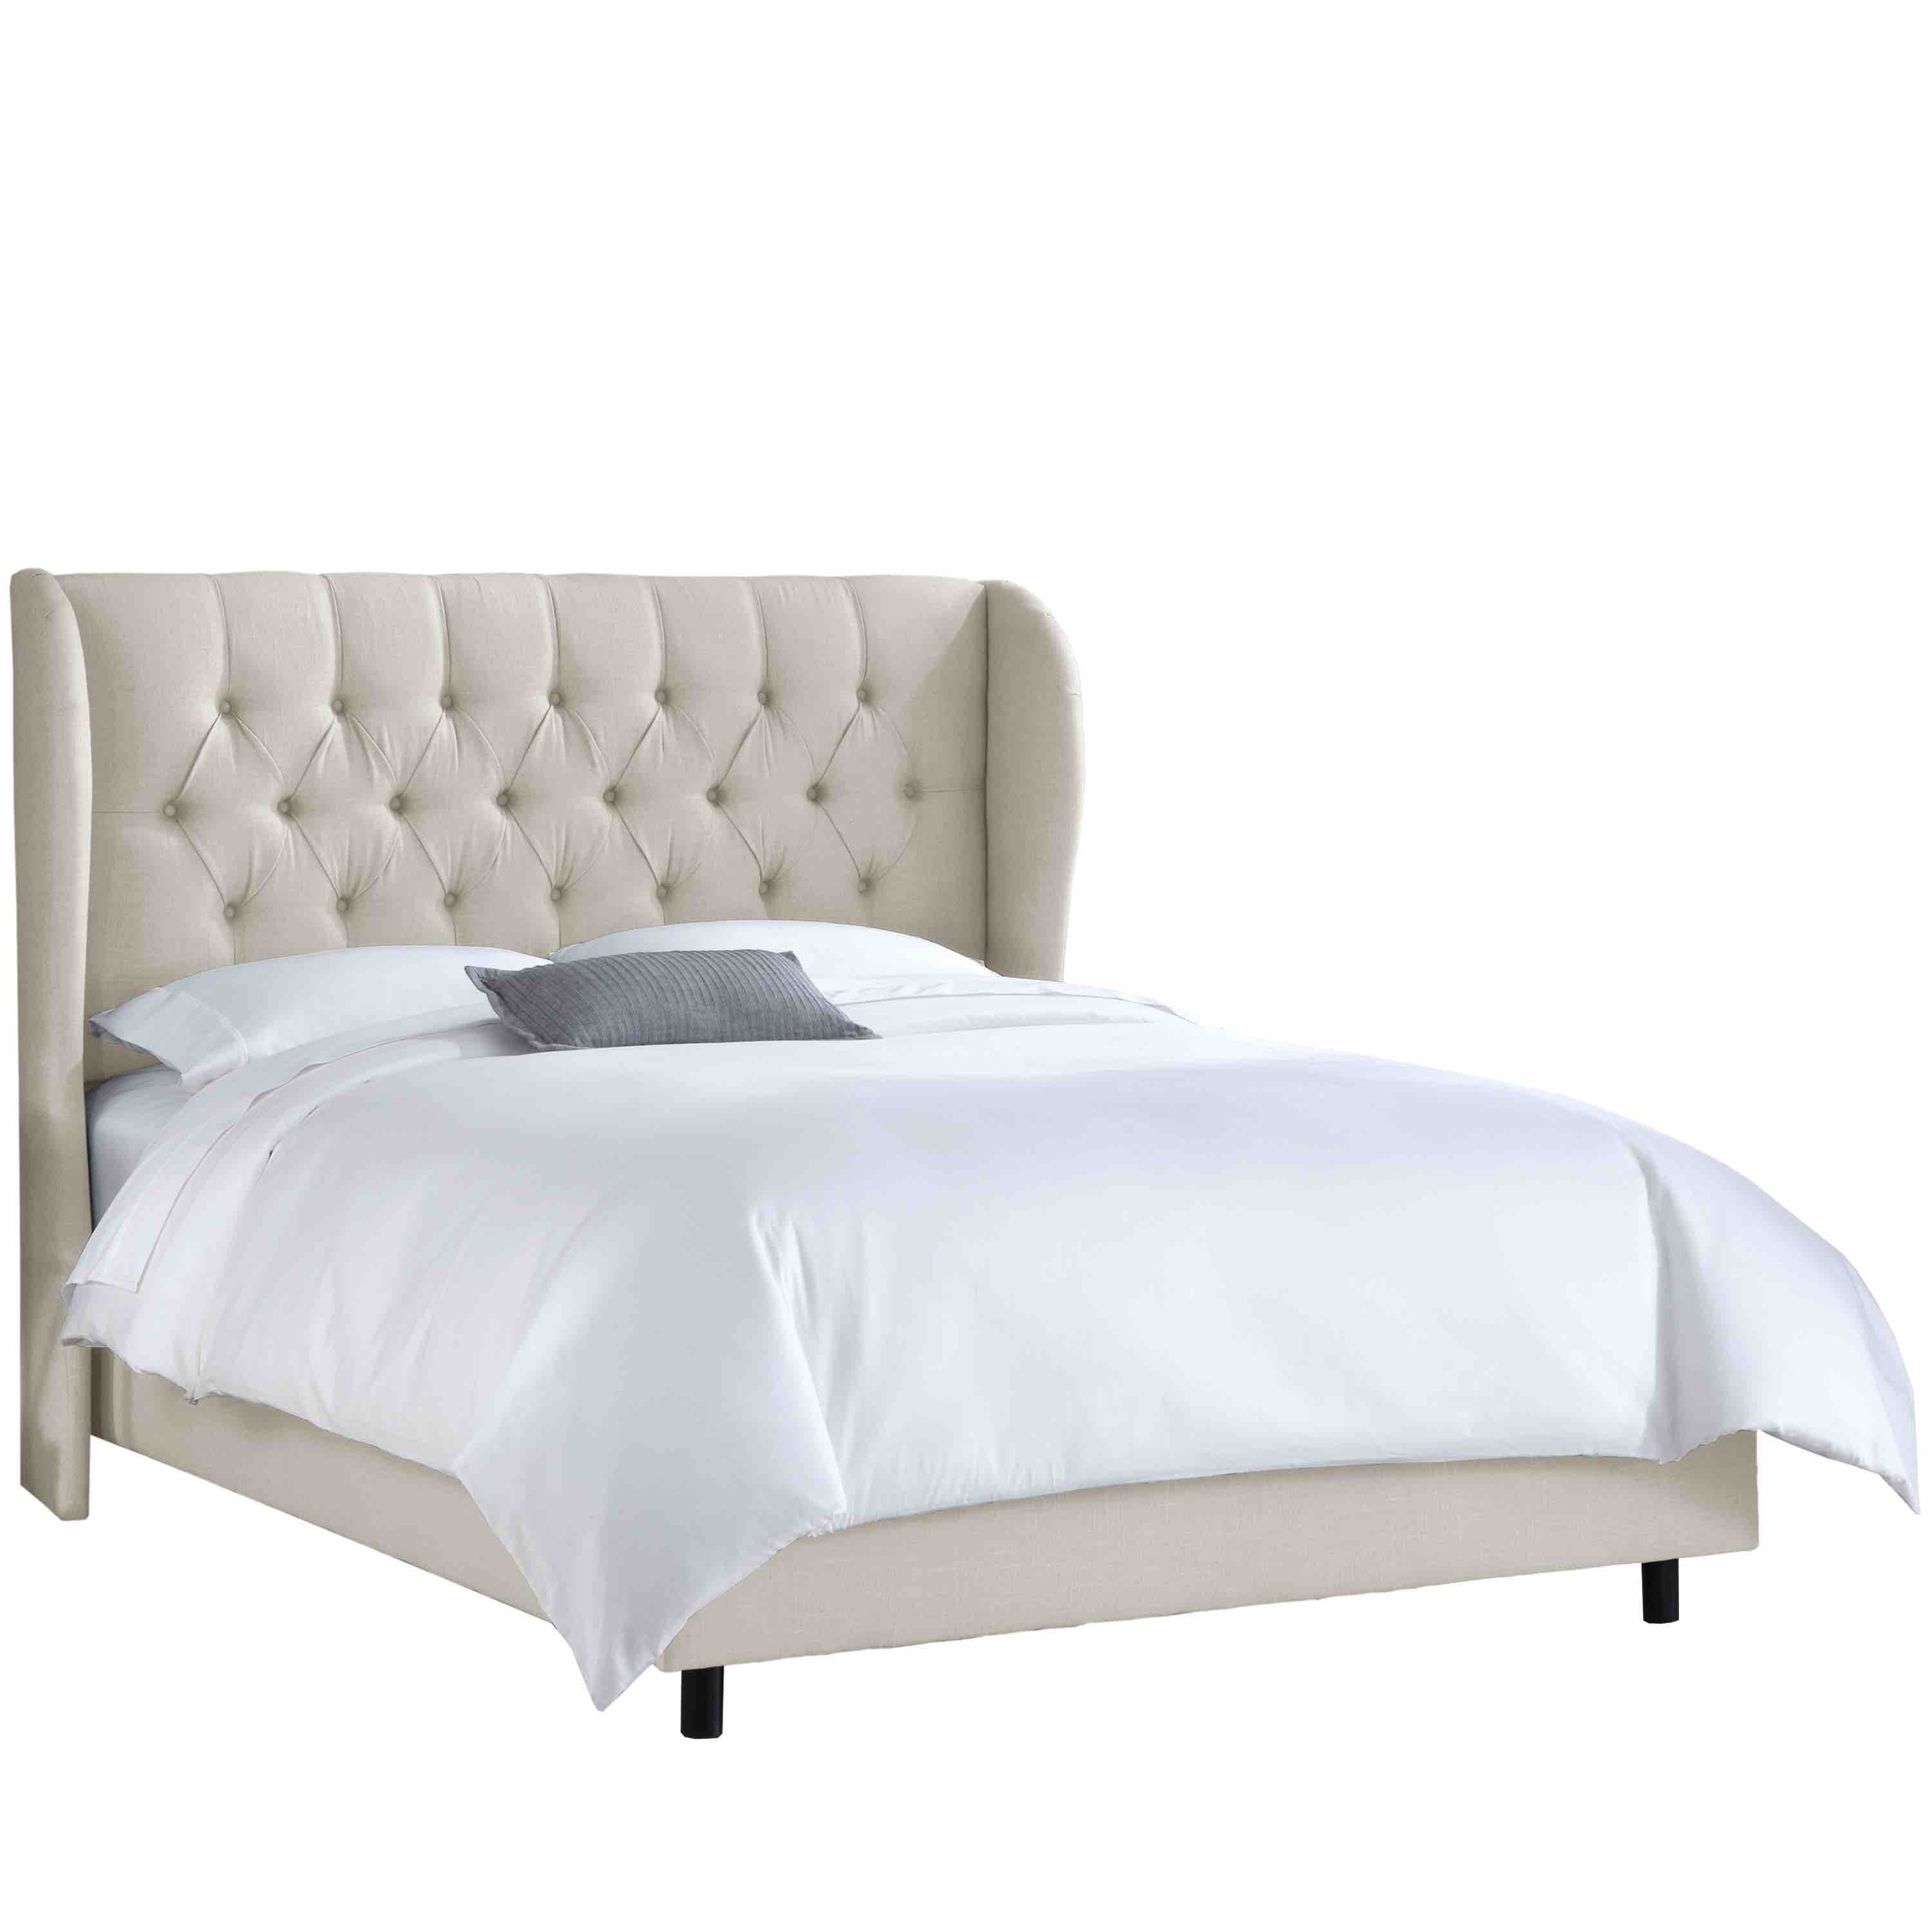 California King Tufted Wingback Bed in Linen Talc - Third & Vine